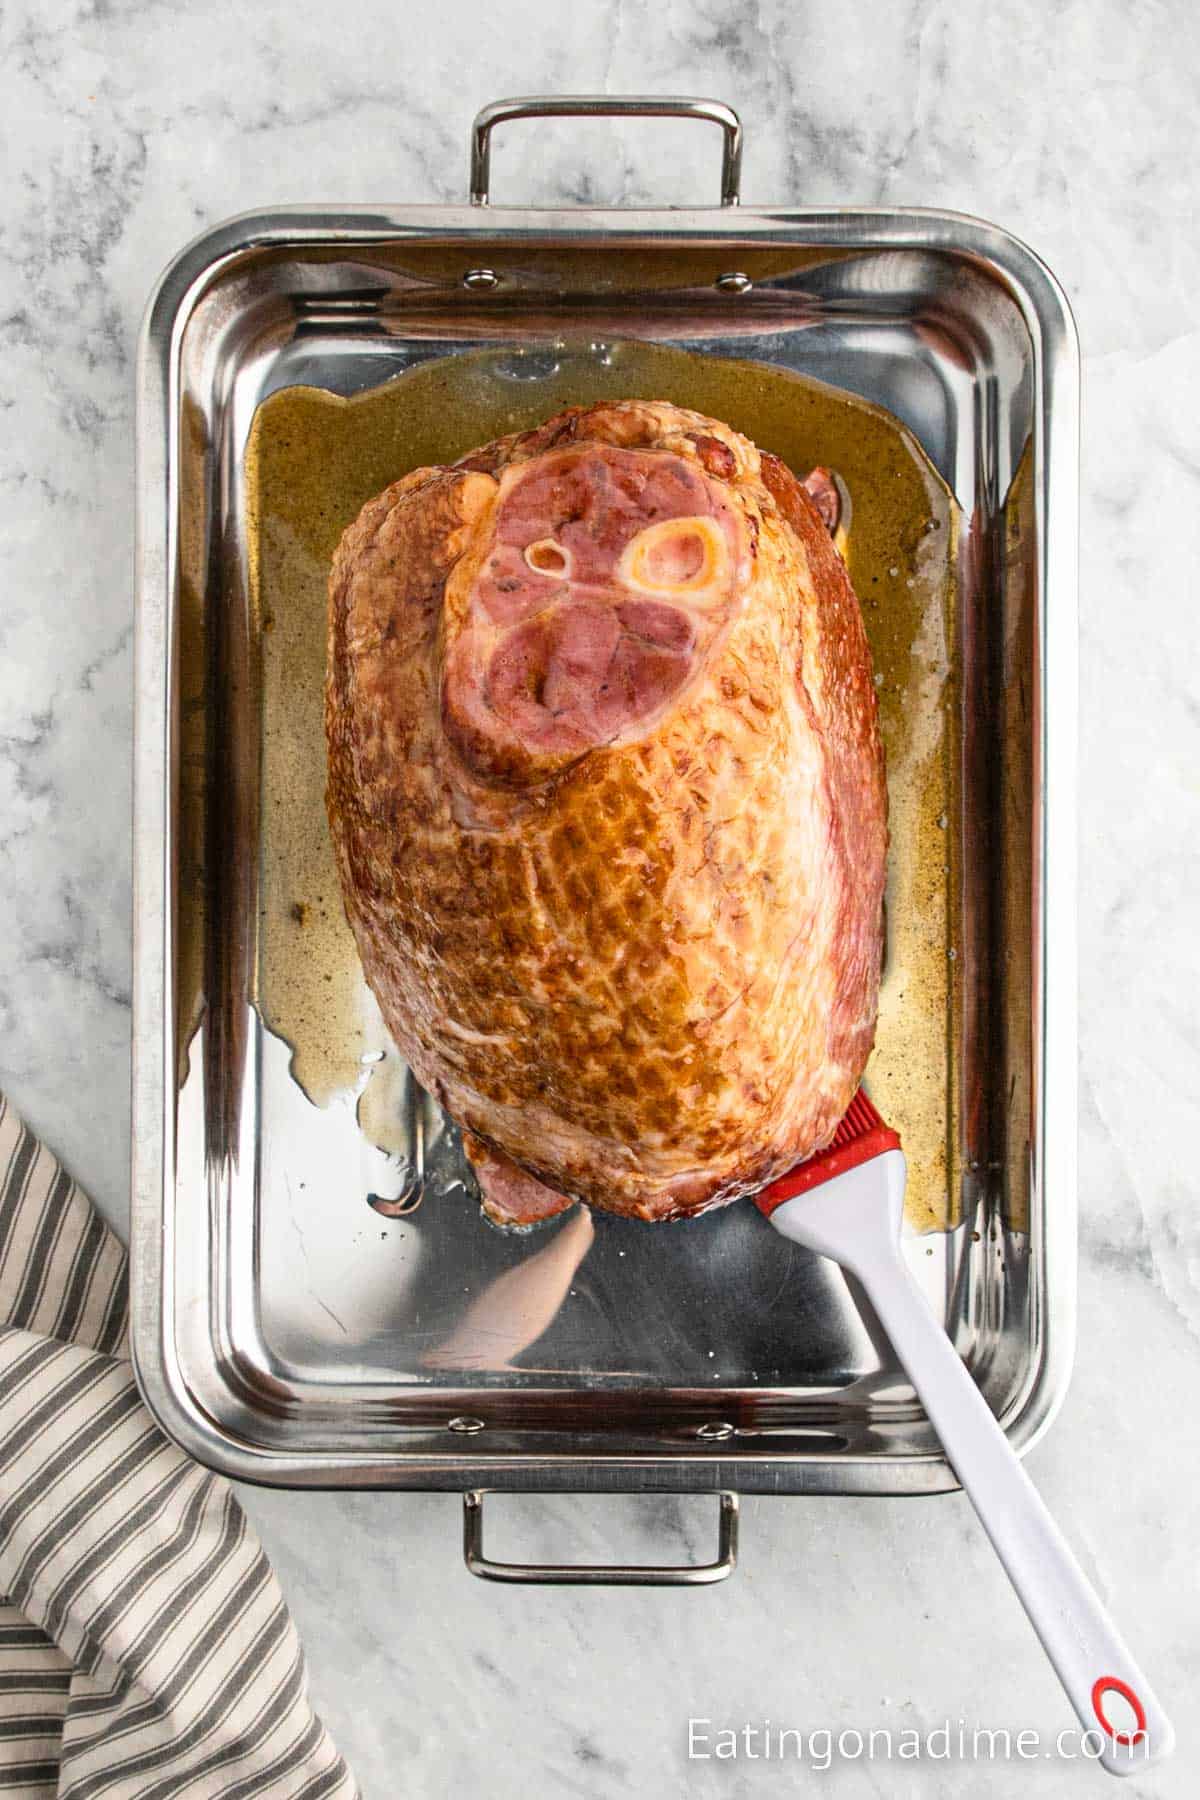 Placing ham in a roasting pan and topping with glaze